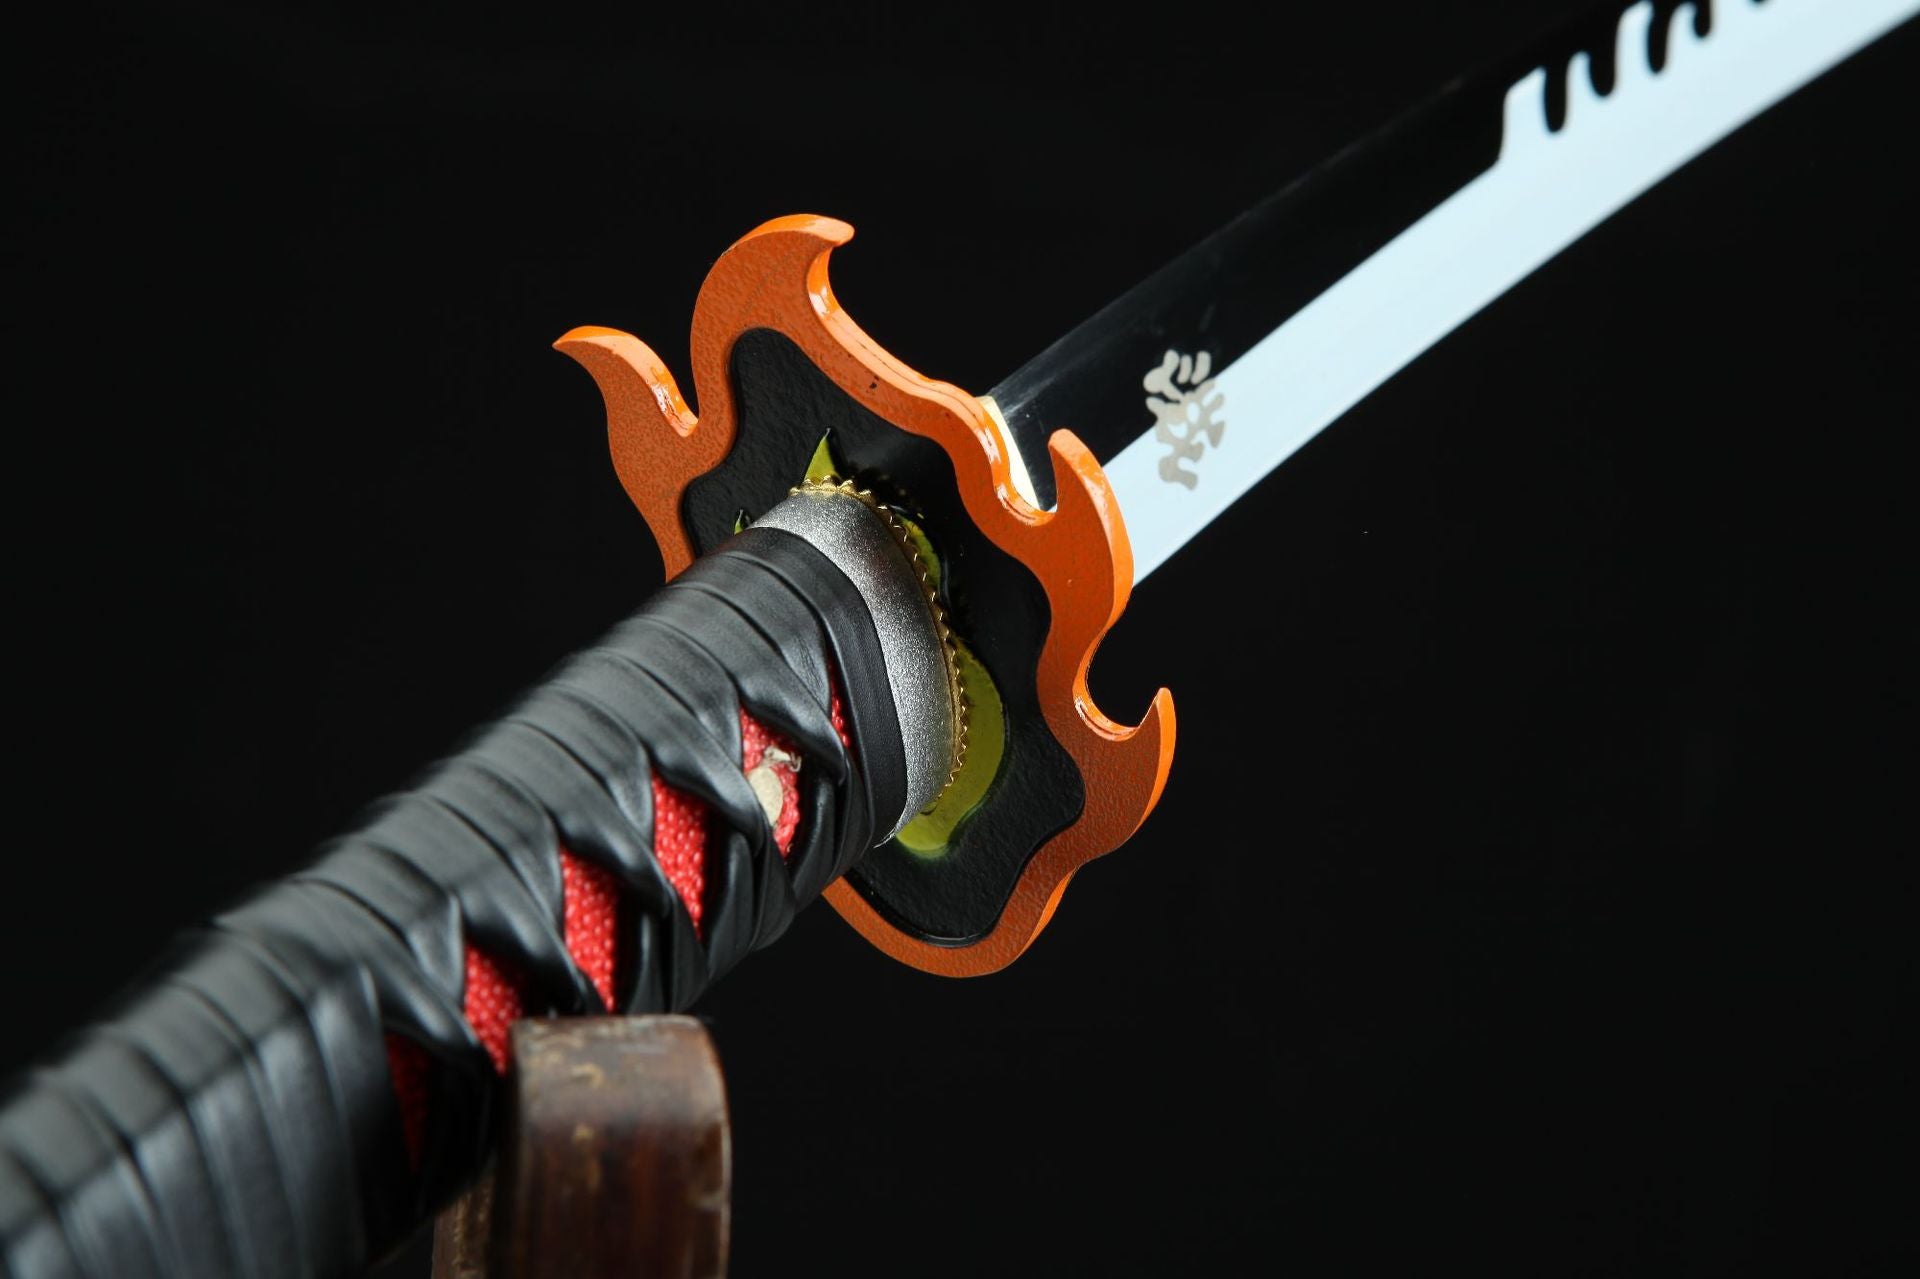 Tanjiro's Nichirin Sword paired with Kyojuro's tsuba, in a close-up from the hilt perspective